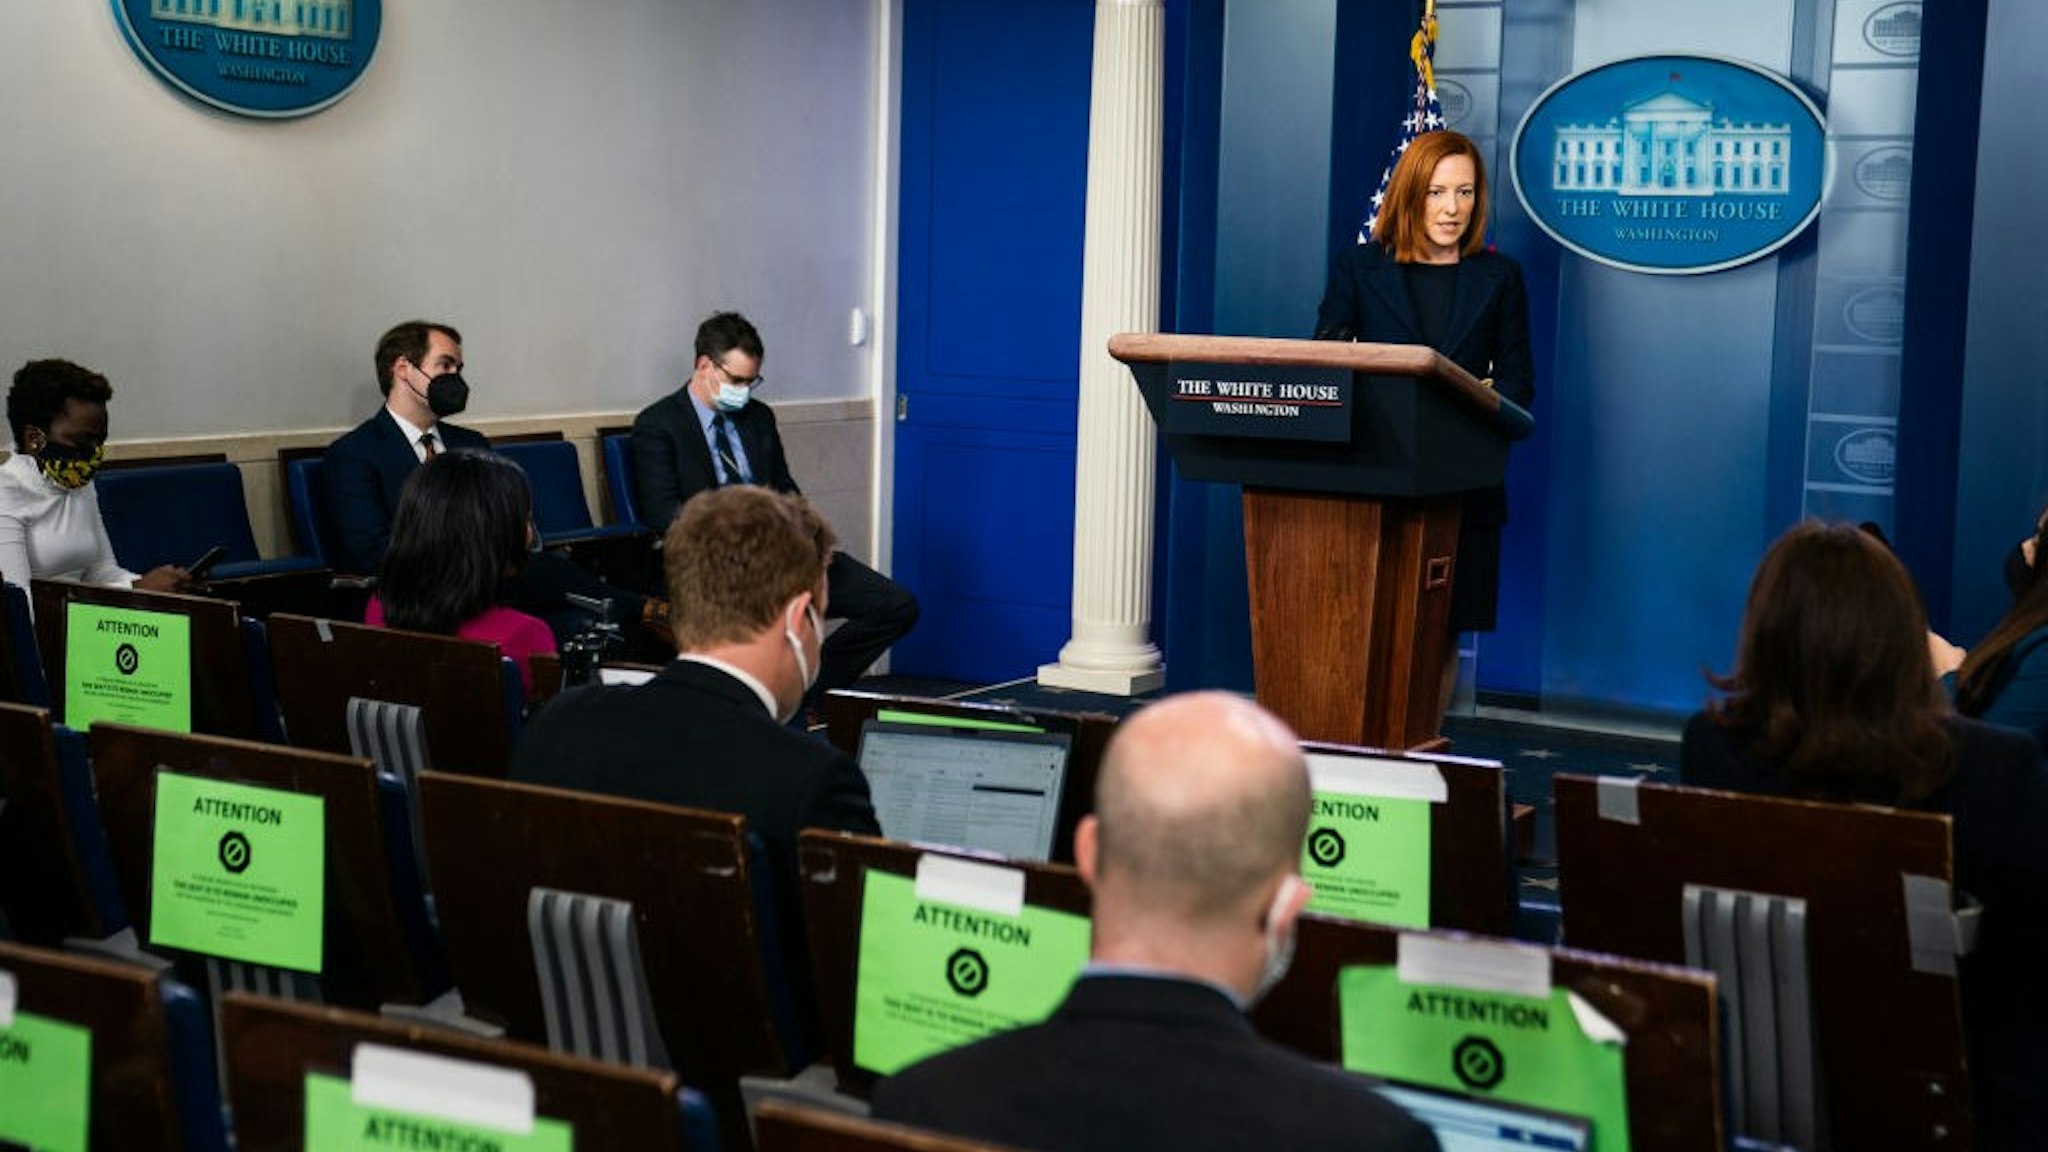 WASHINGTON, DC March 29, 2021: White House Press Secretary Jen Psaki during the daily press briefing in the James Brady Room at the White House on March 29, 2021. (Photo by